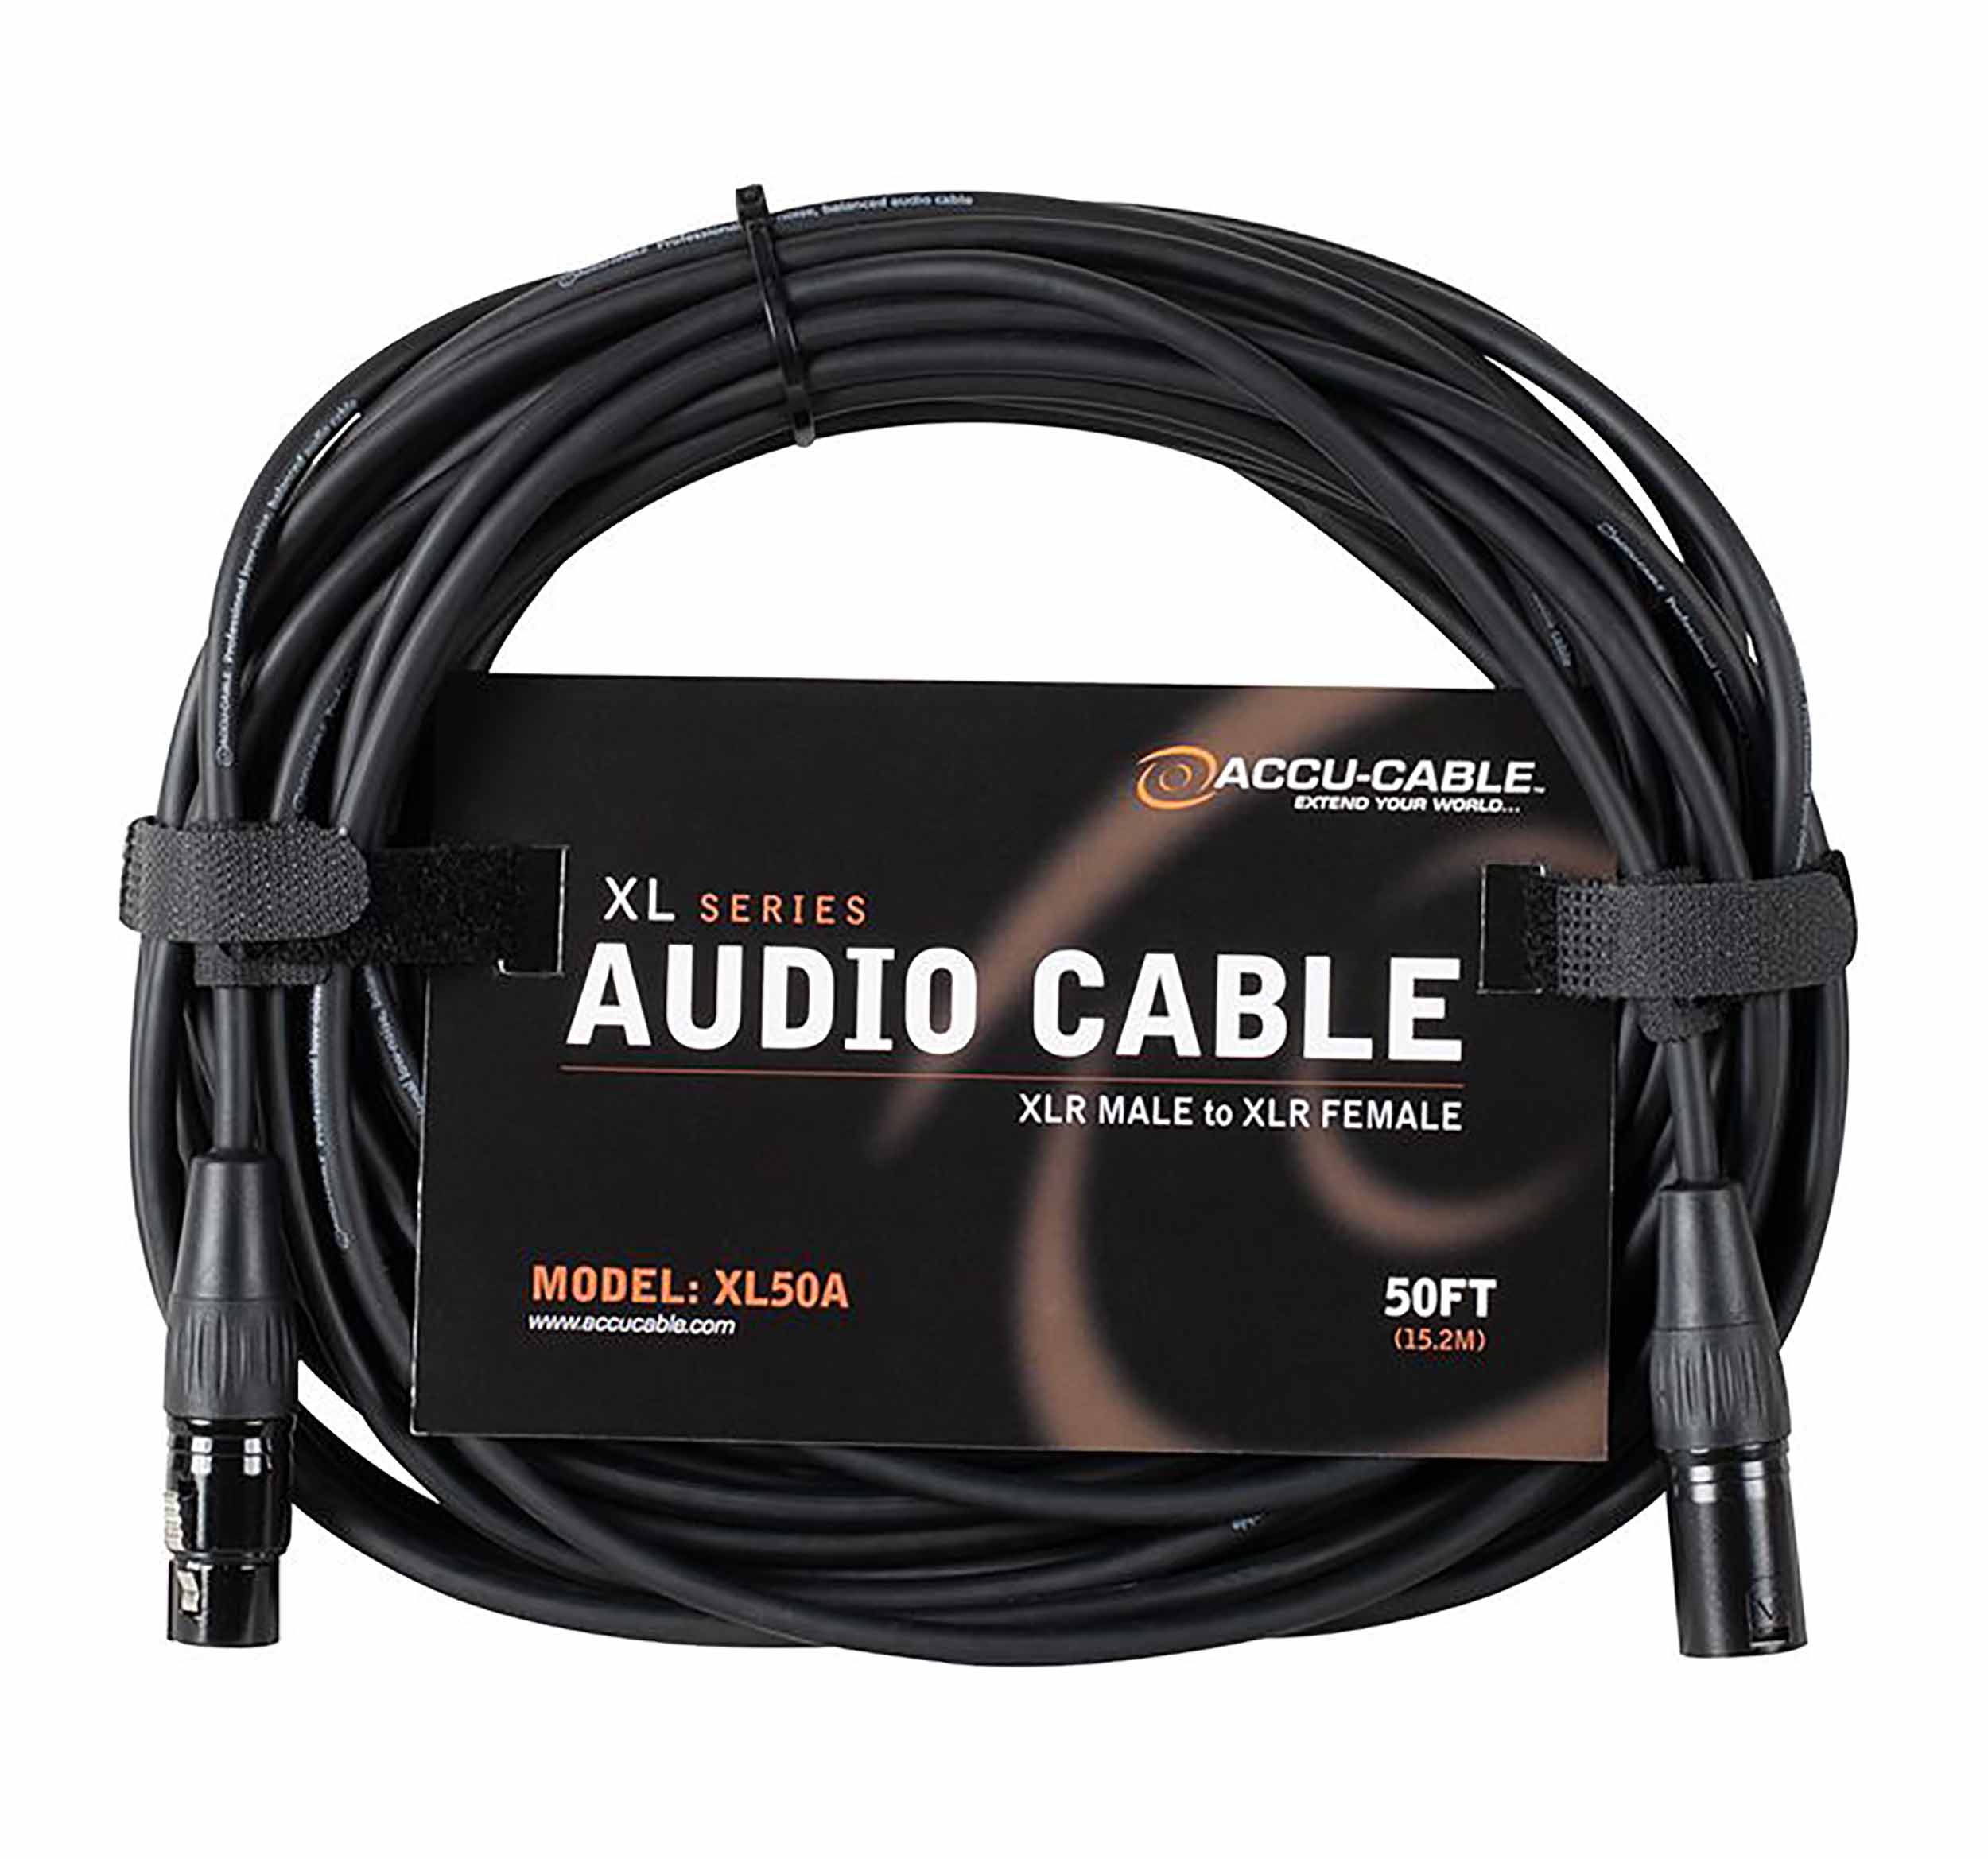 Accu-Cable XL-VAR, XLR Male to XLR Female Balanced Audio Cable by Accu Cable